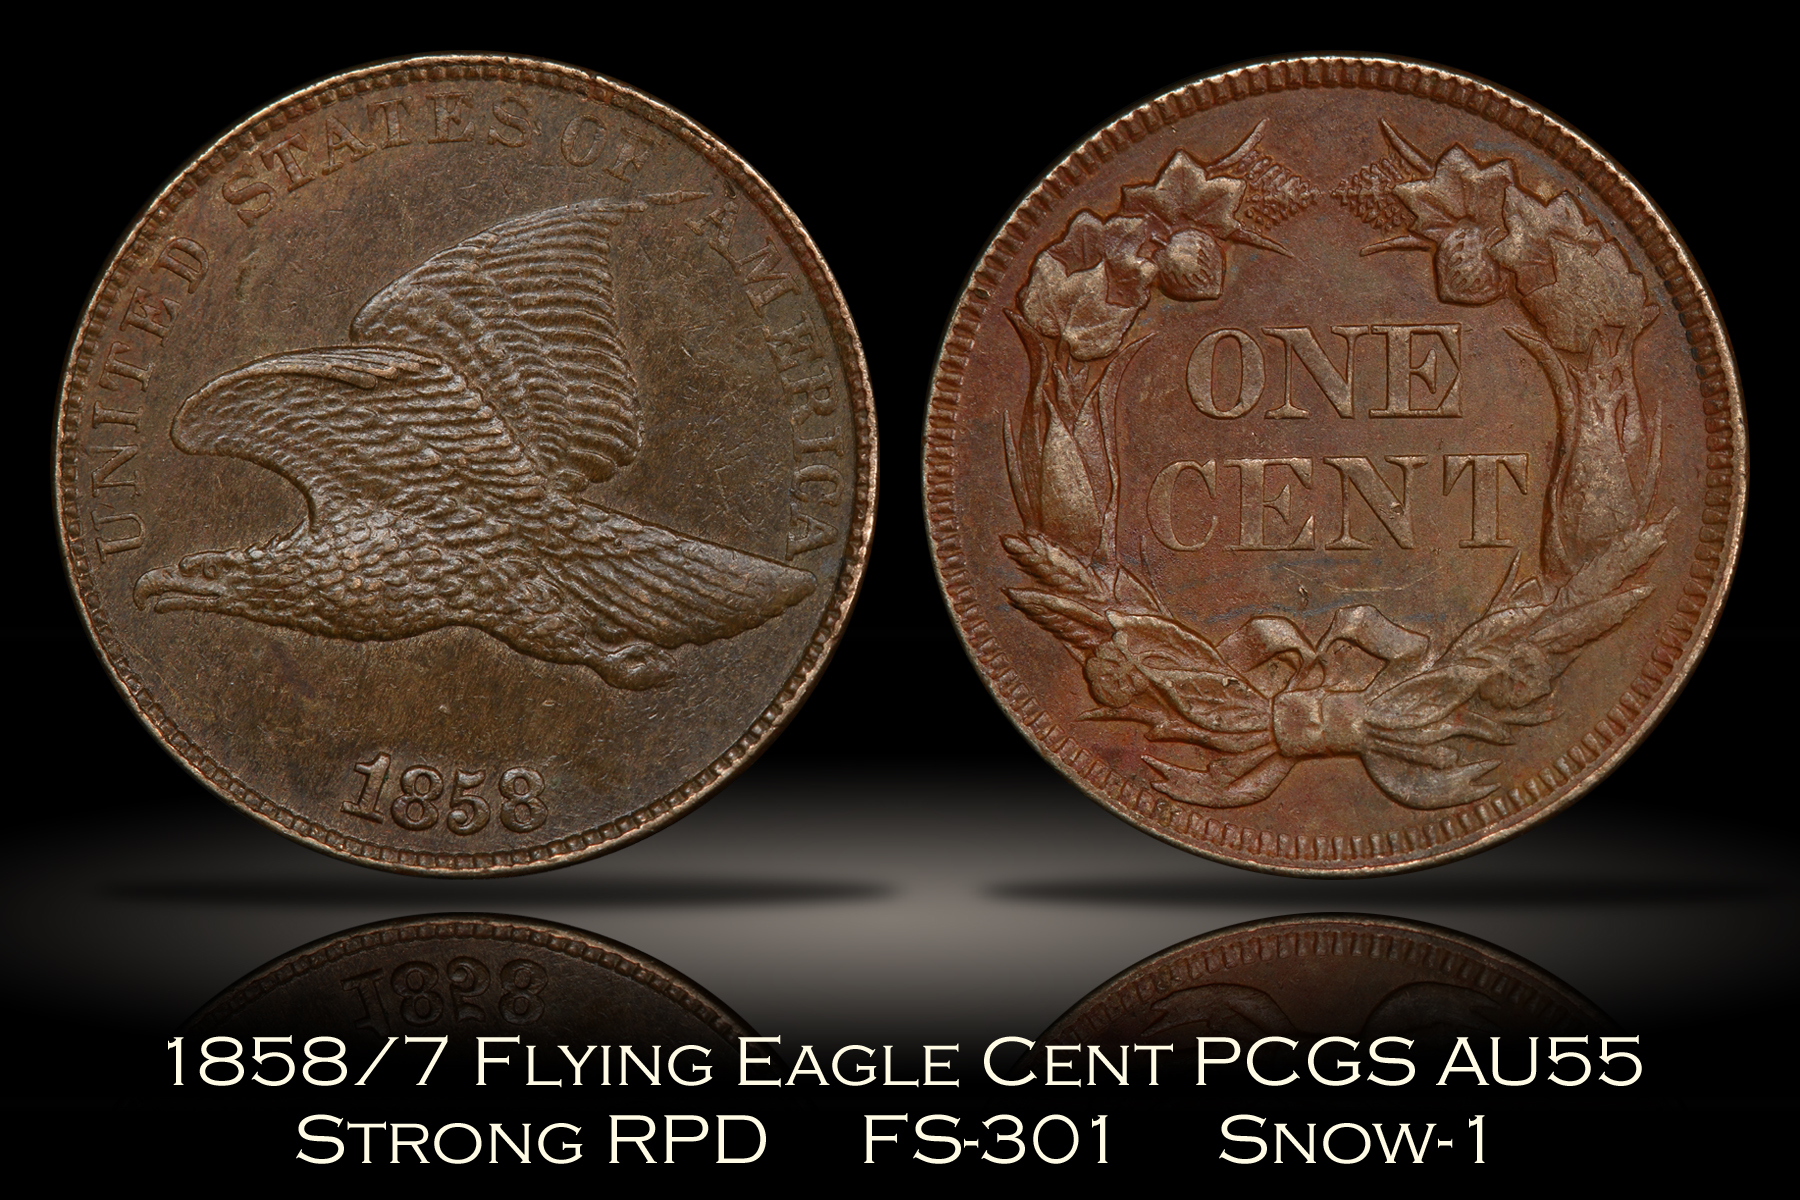 Michael Kittle Rare Coins - 1858/7 Flying Eagle Cent Strong Overdate FS